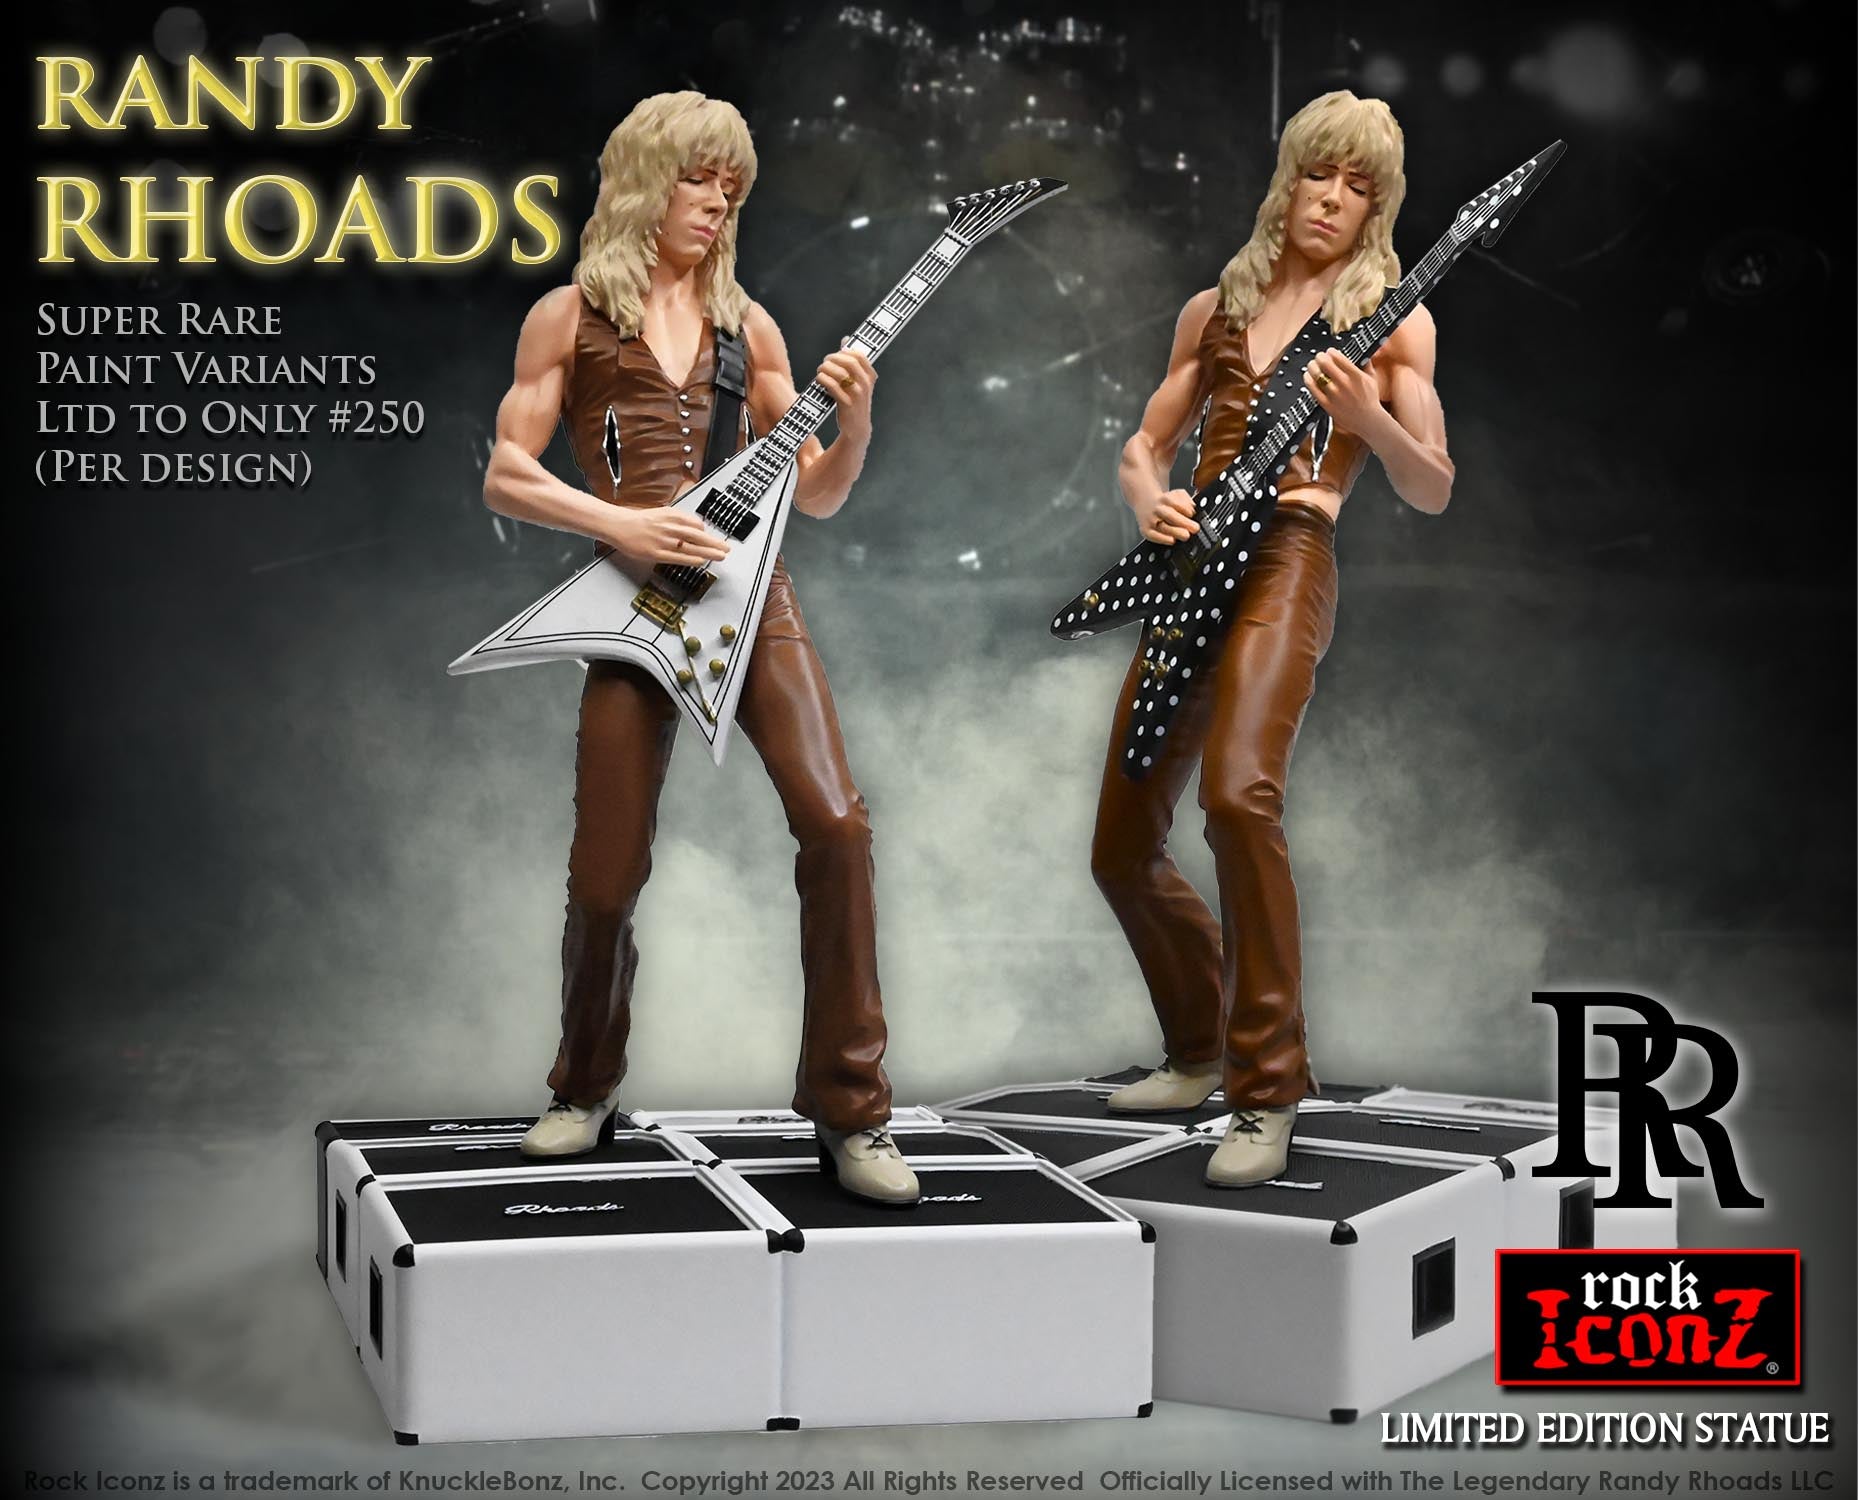 New Super Limited Randy Rhoads Variant Statues from KnuckleBonz